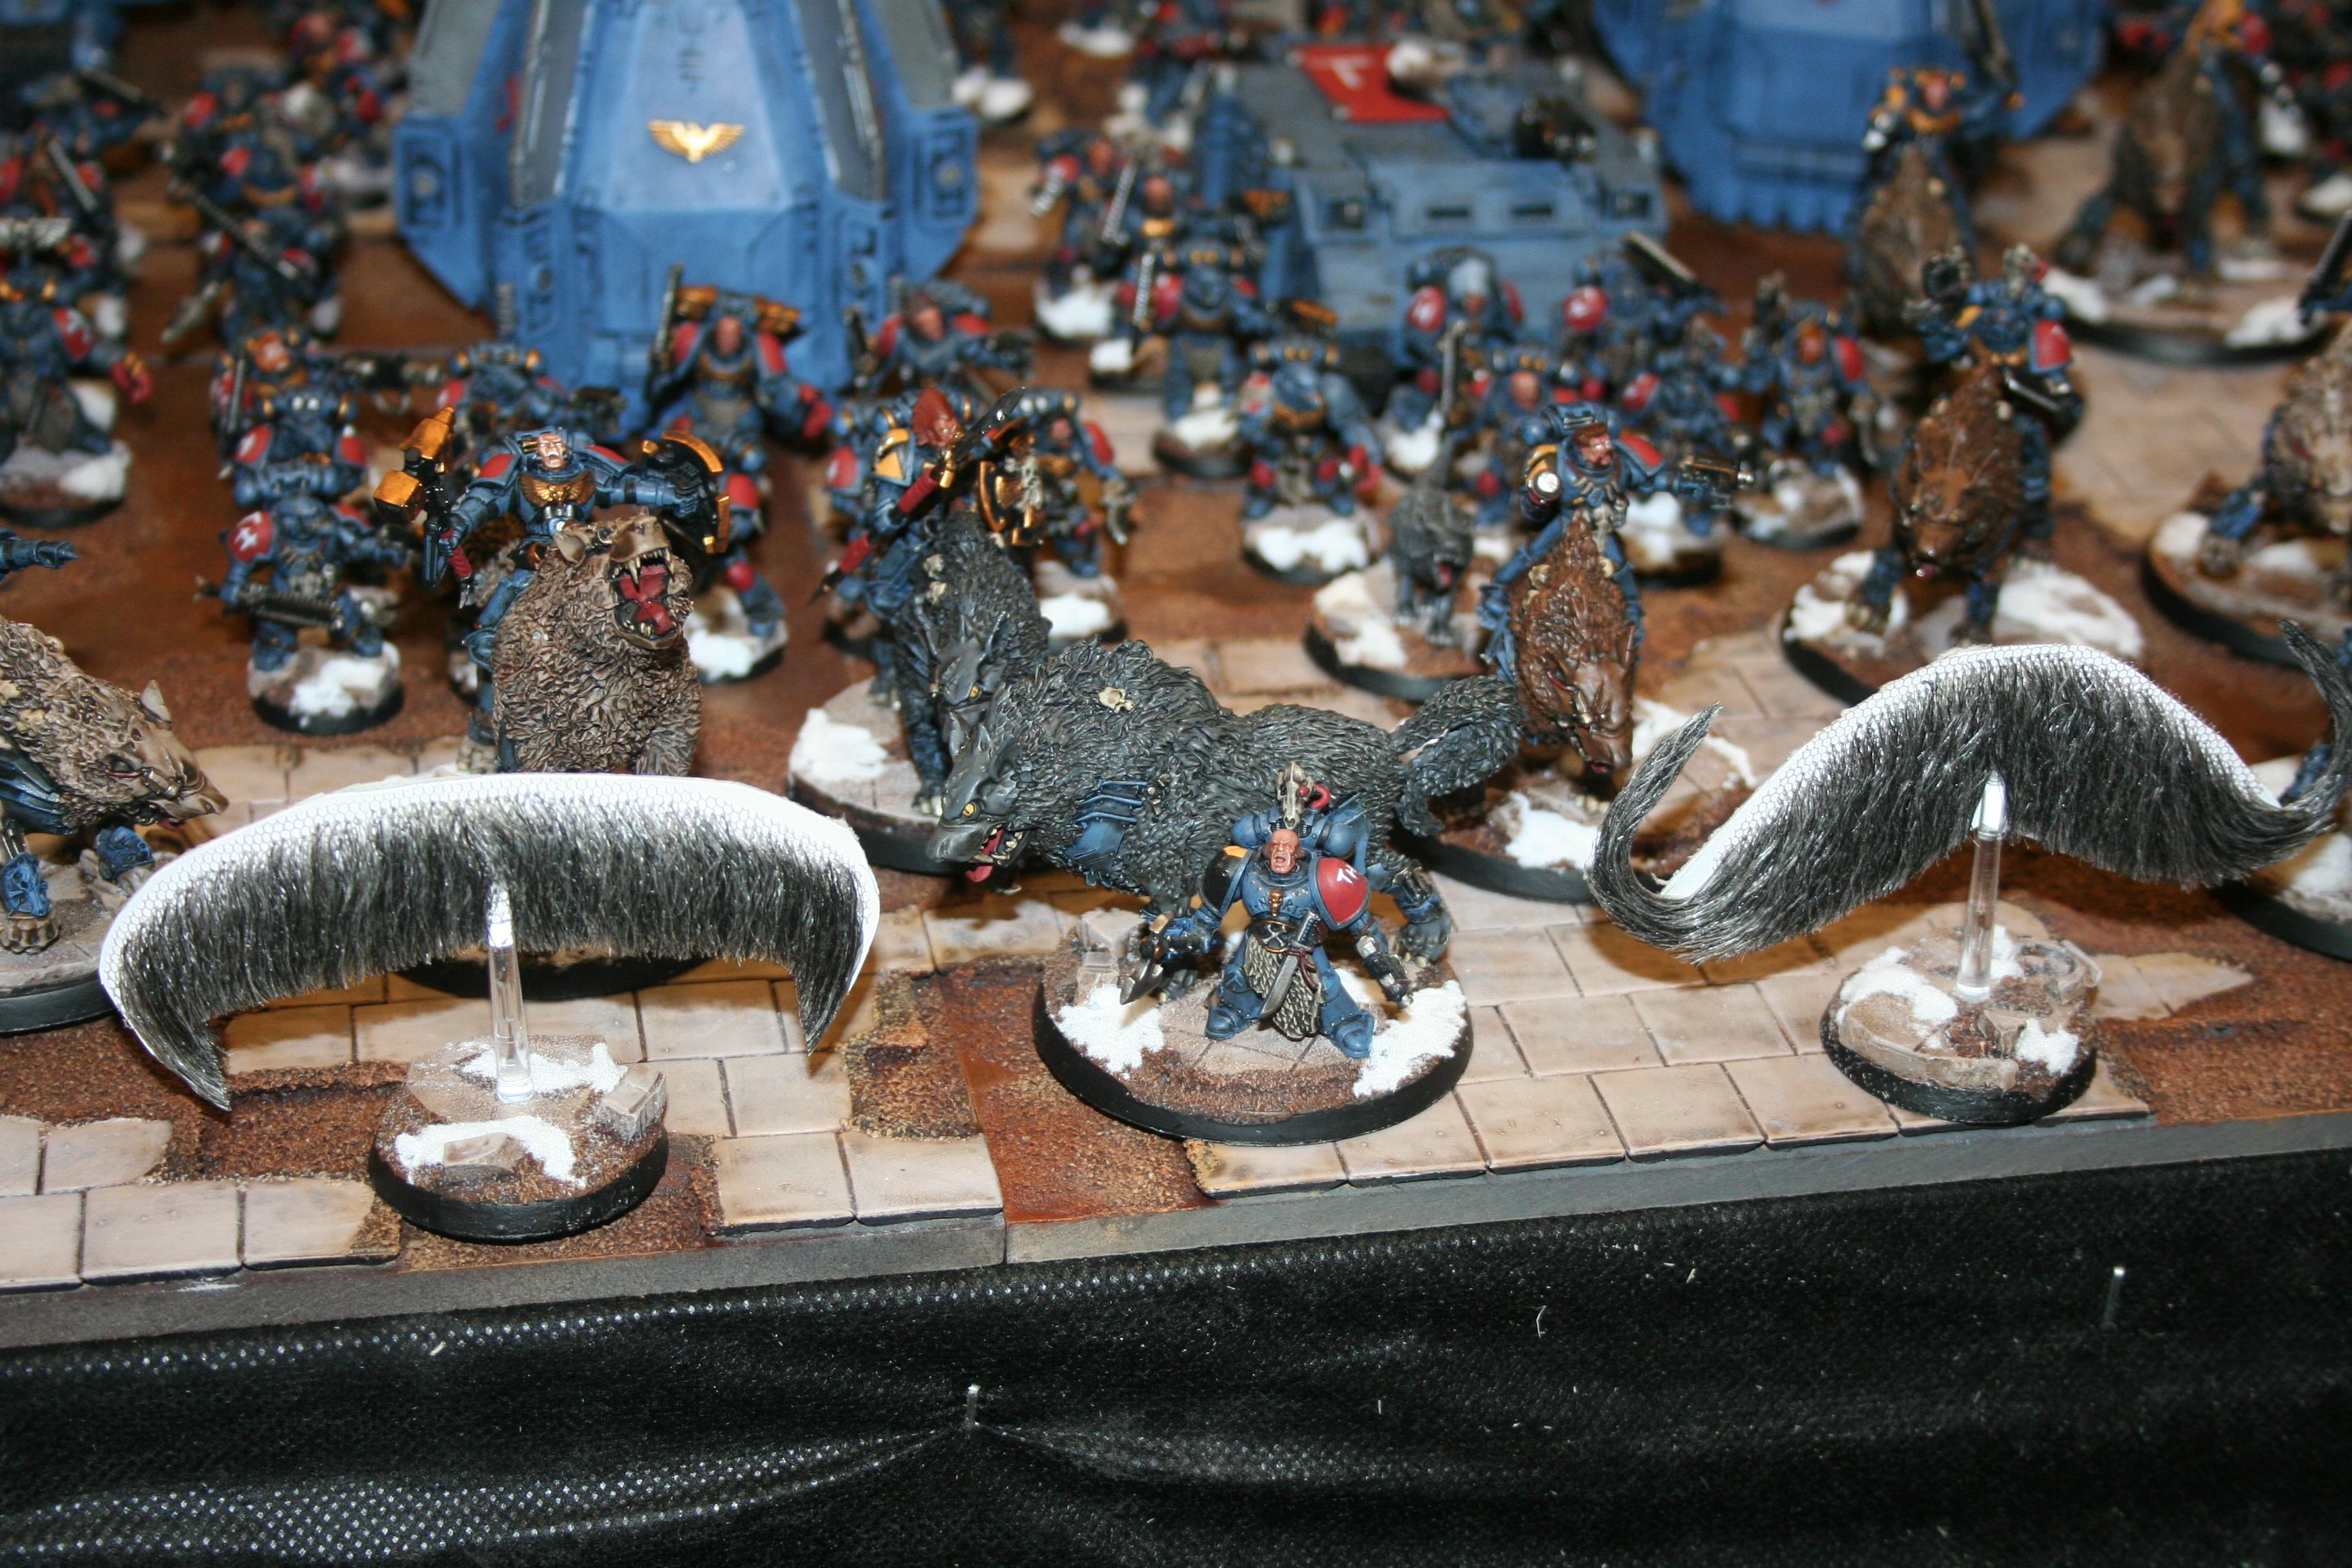 Gigantic Mustaches, Space Wolves, Thunder Wolf